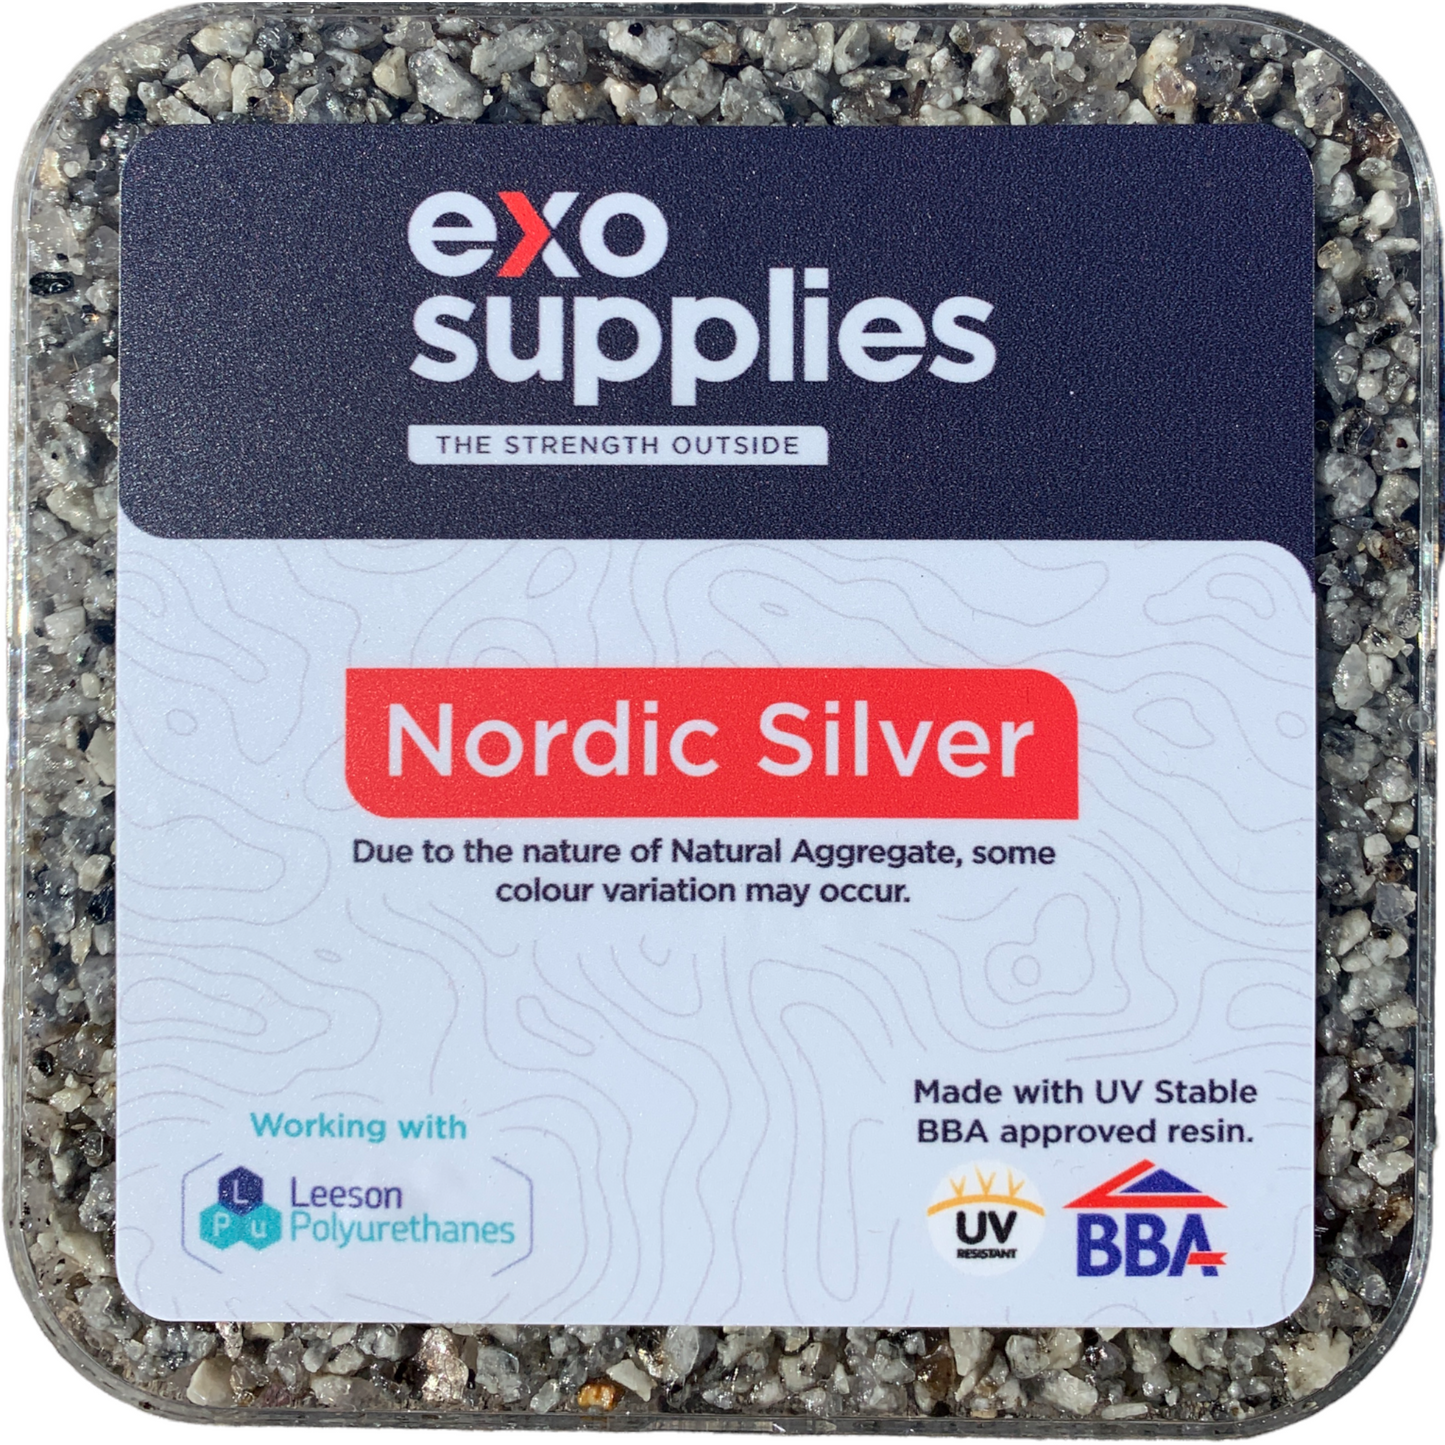 Exo Nordic Silver with BBA 7.5kg UV stable Resin